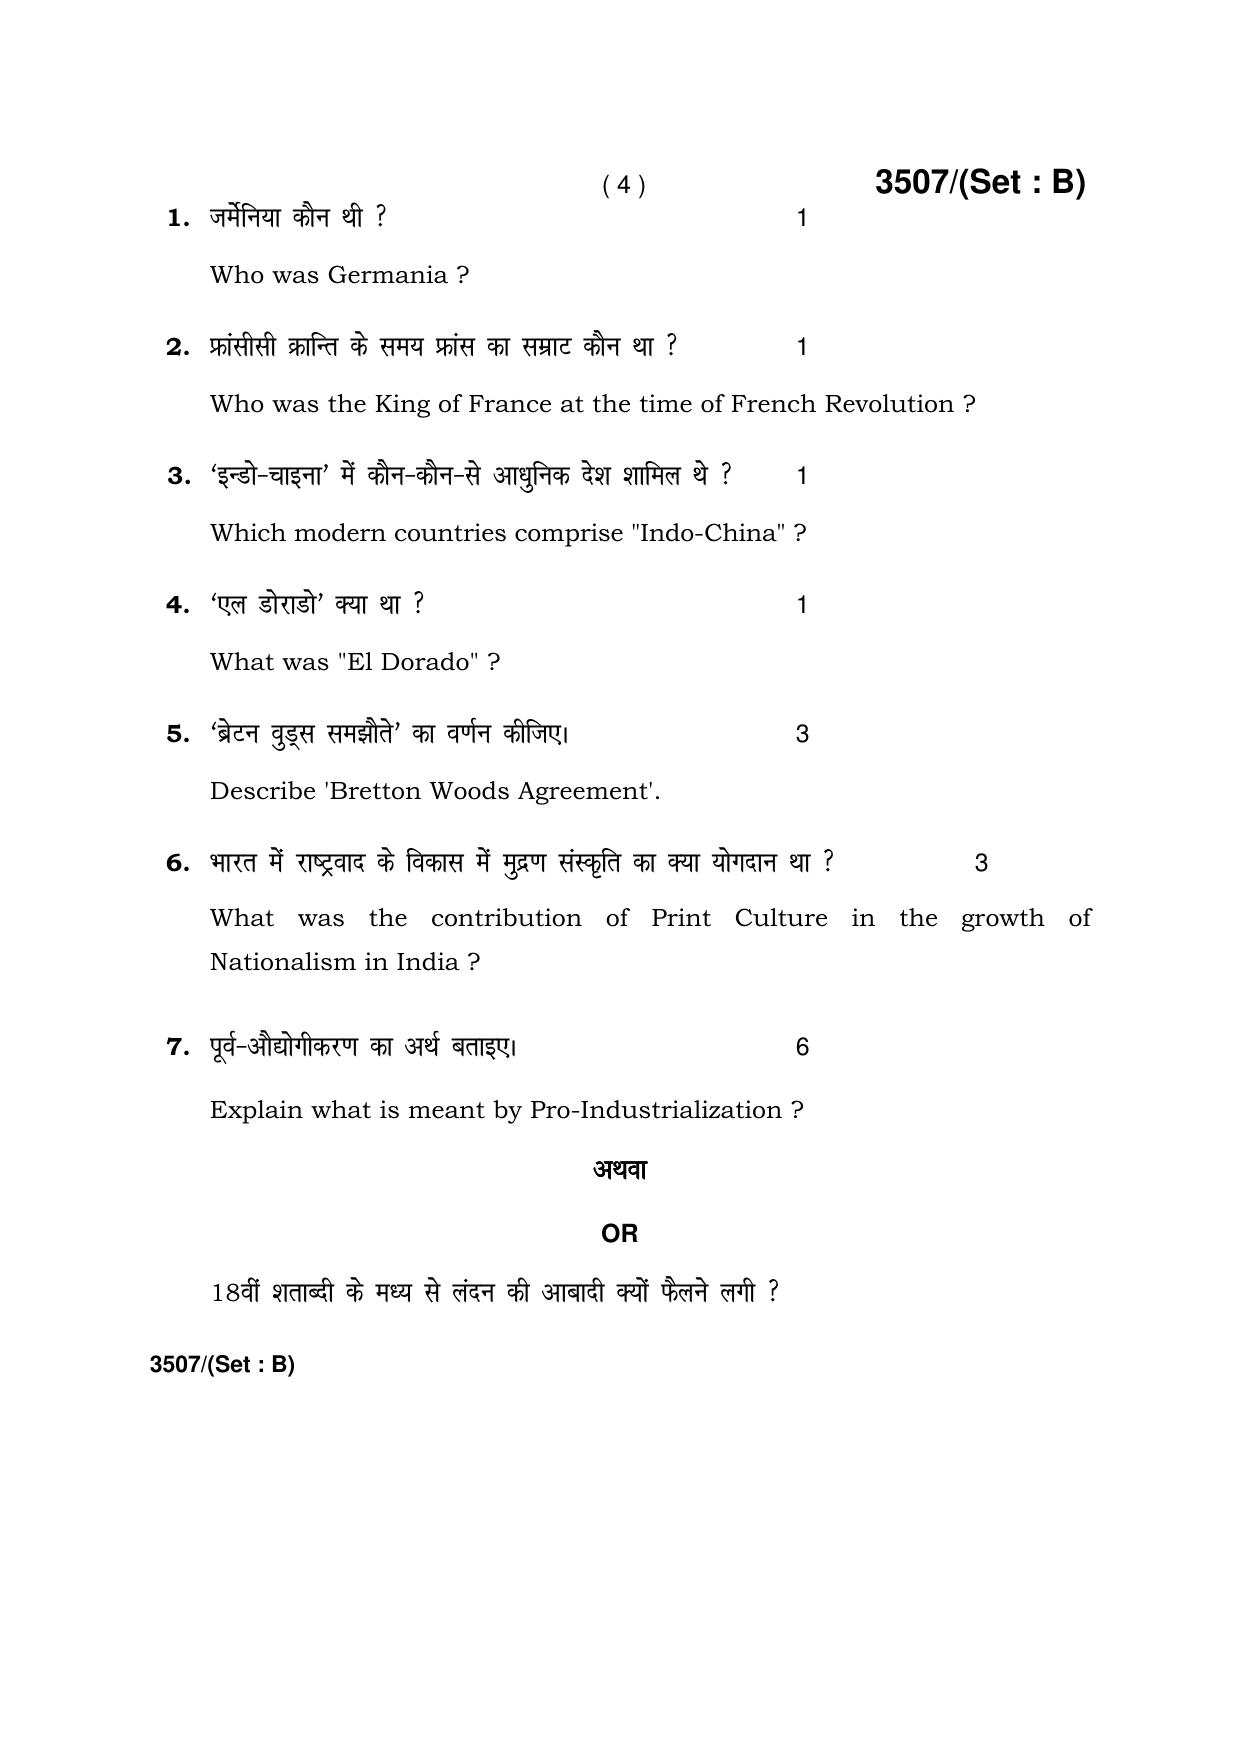 Haryana Board HBSE Class 10 Social Science -B 2018 Question Paper - Page 4